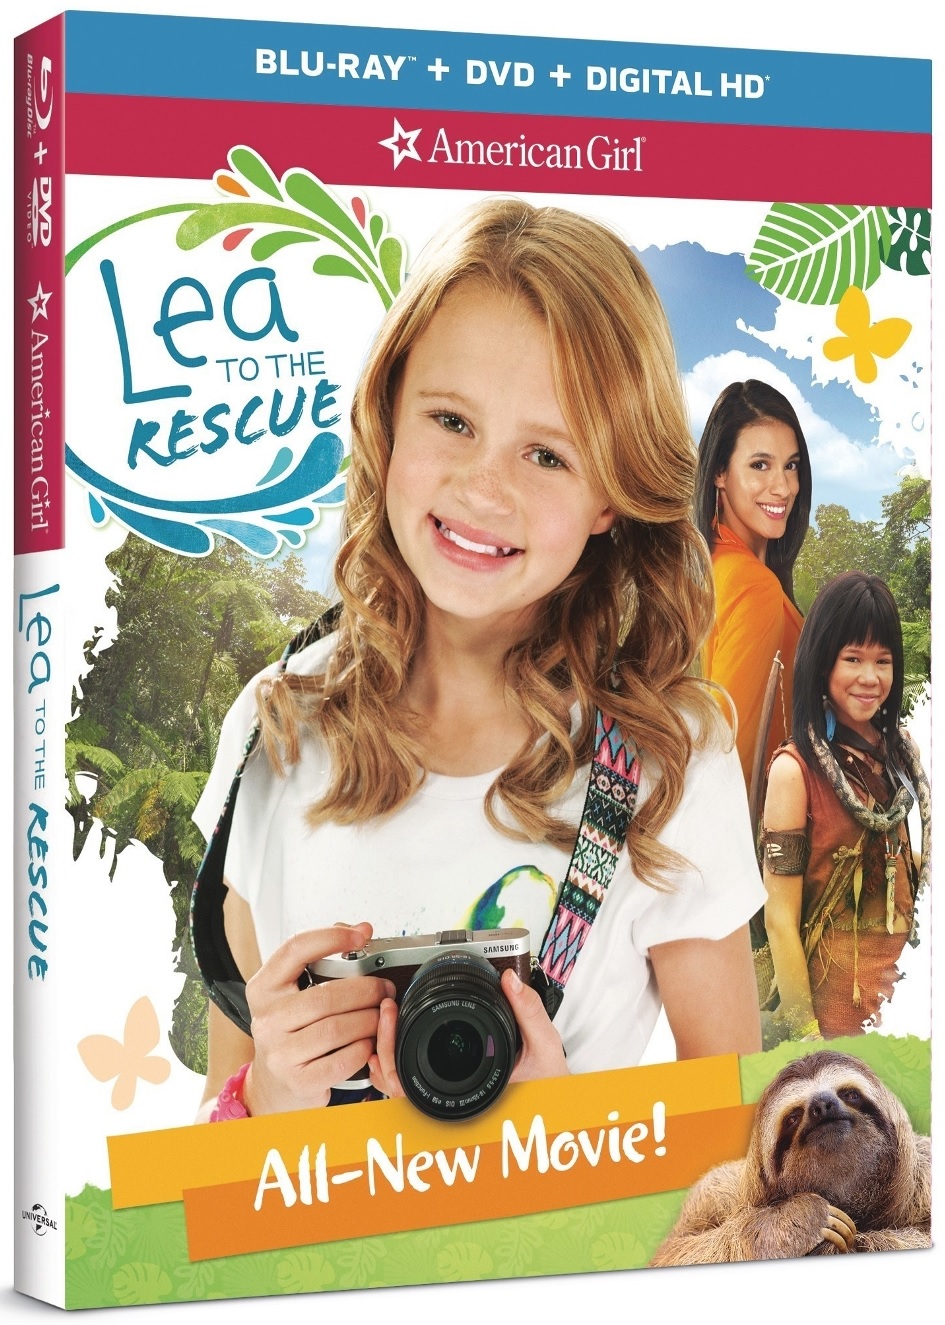 American Girl: Lea To The Rescue Blu-ray Review